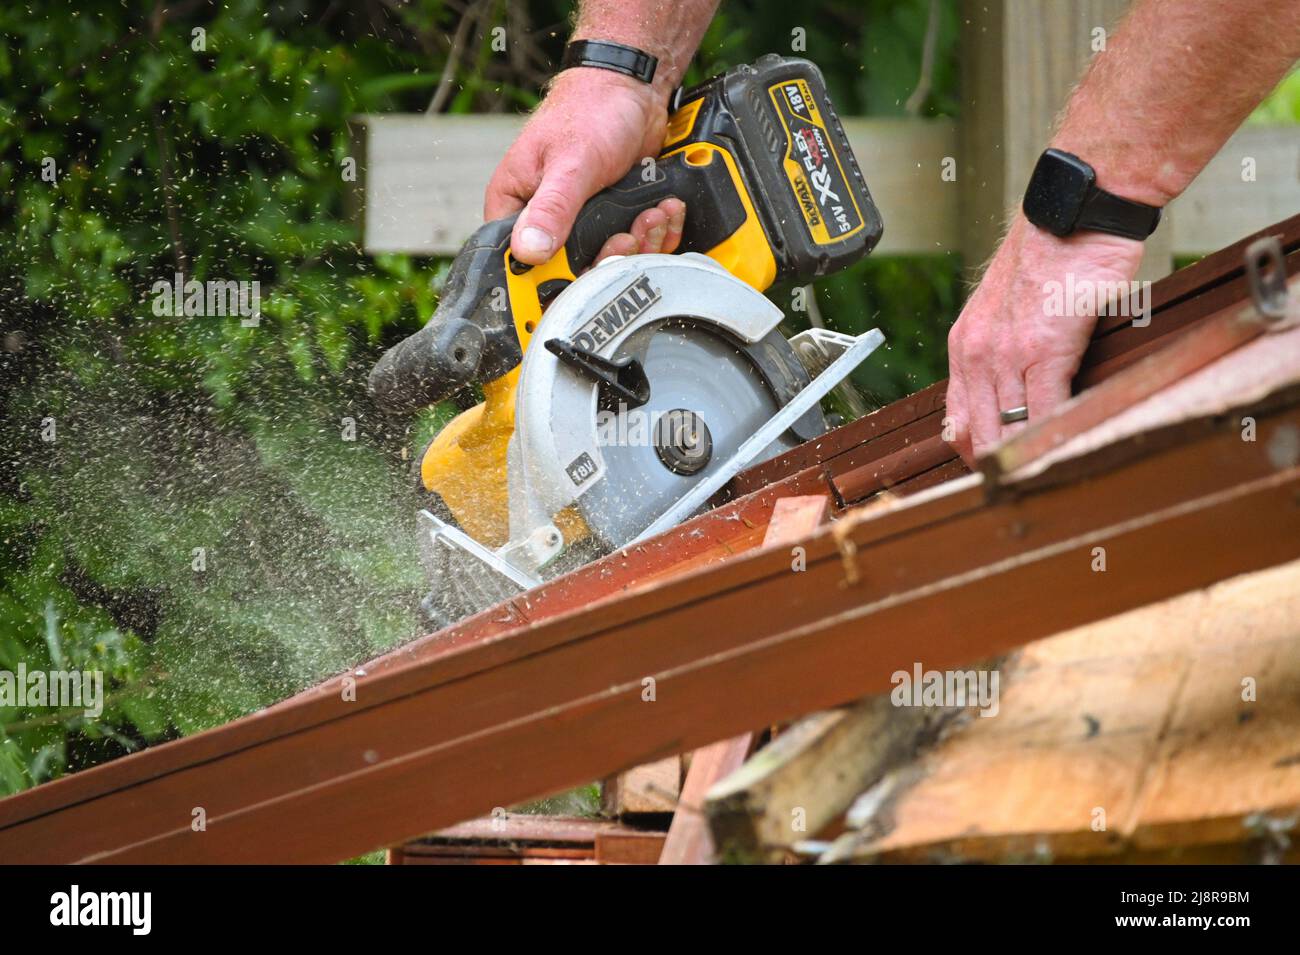 Cordless Dewalt circular saw, Skilsaw, being used to cut through old wooden fence panels Stock Photo